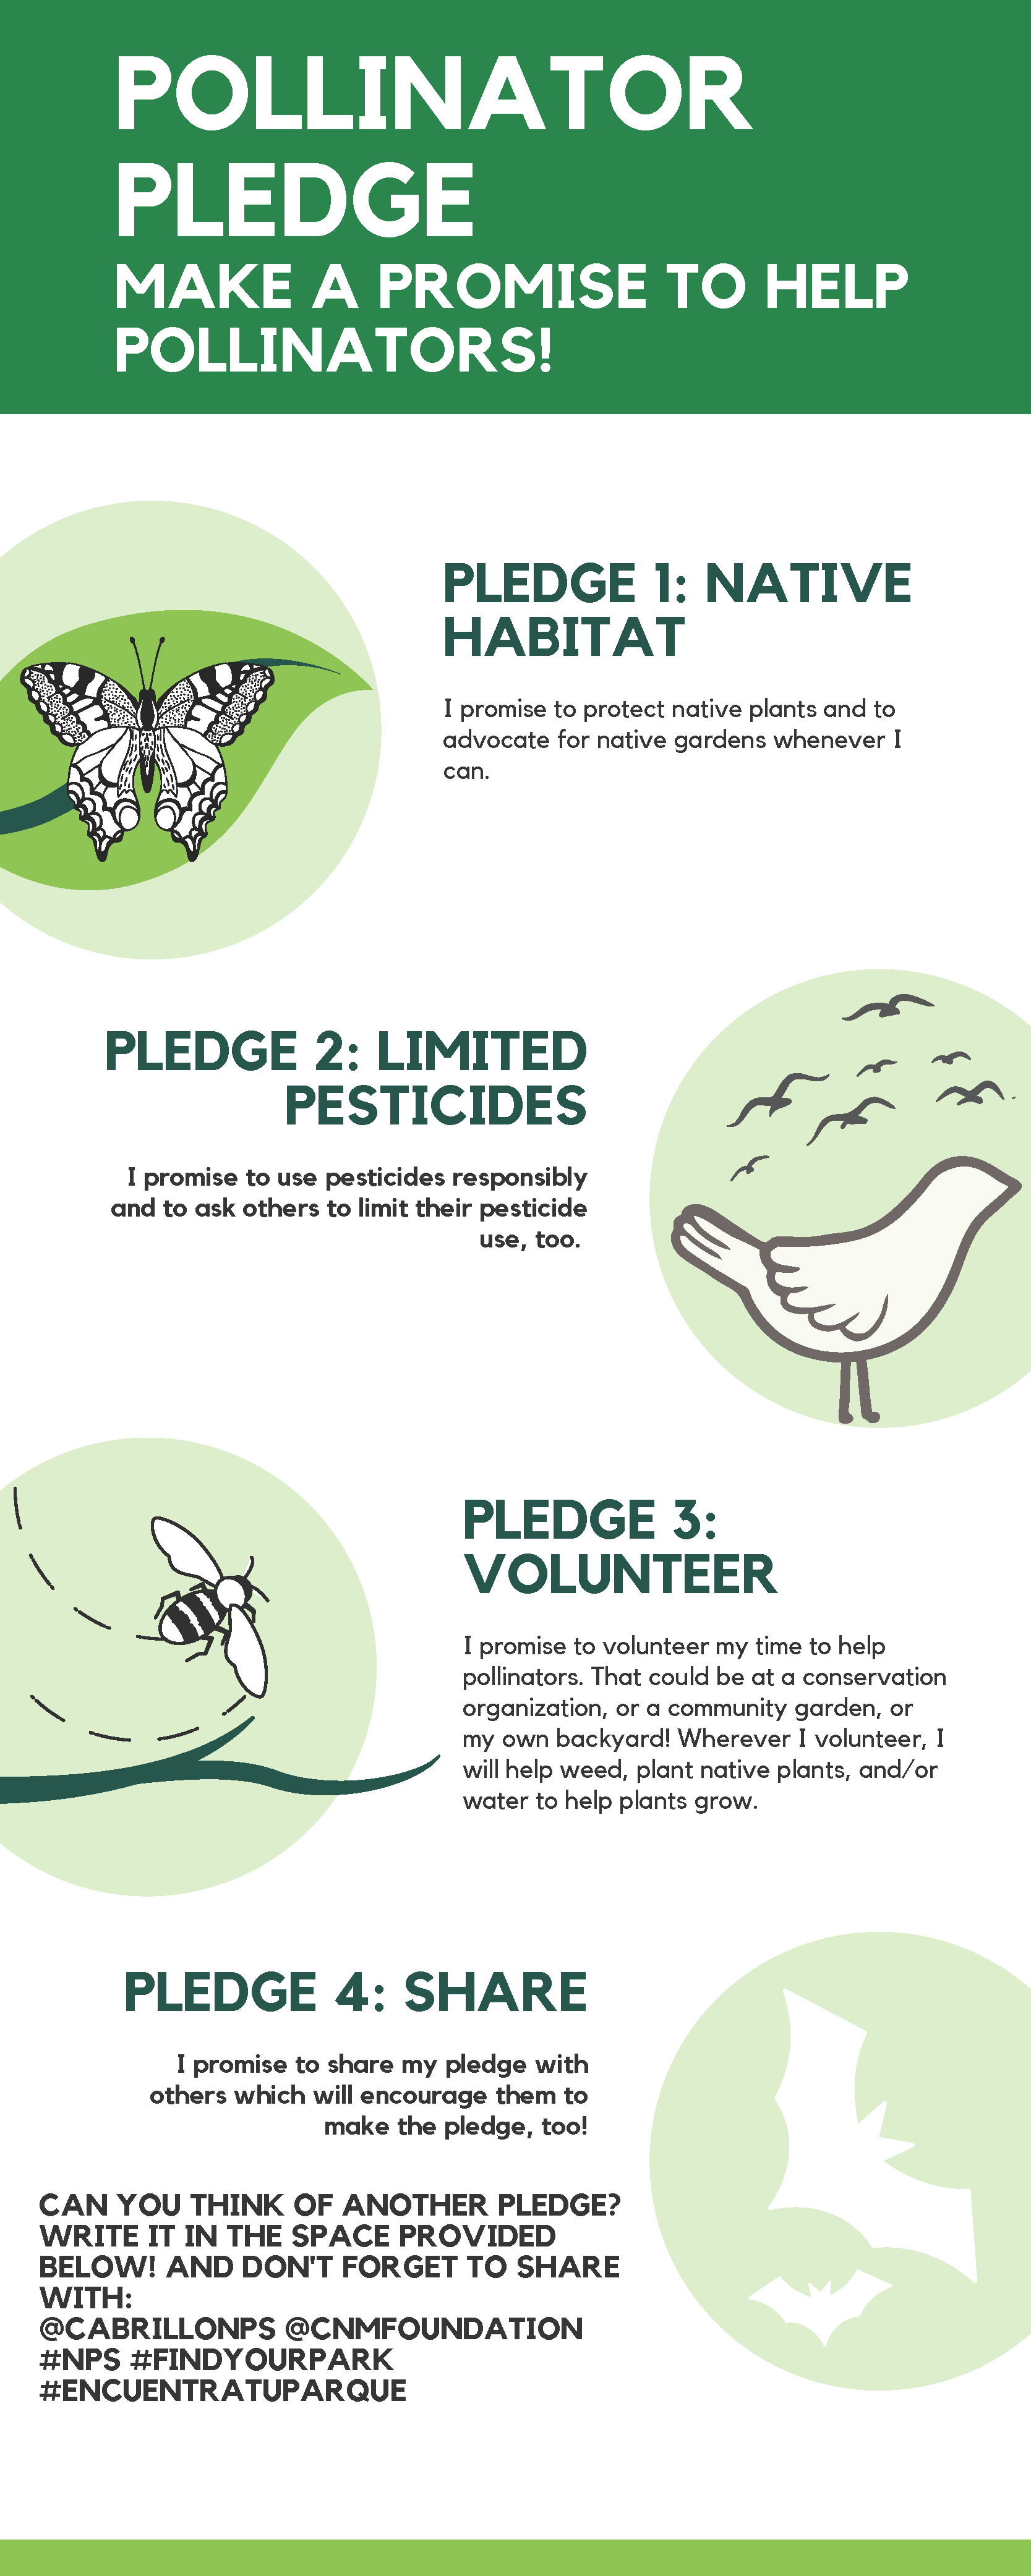 A flyer in green and white titled "Pollinator Pledge - Make a Promise to Help Pollinators!" with 3 action steps outlined - native habitat, limited pesticides, volunteer.